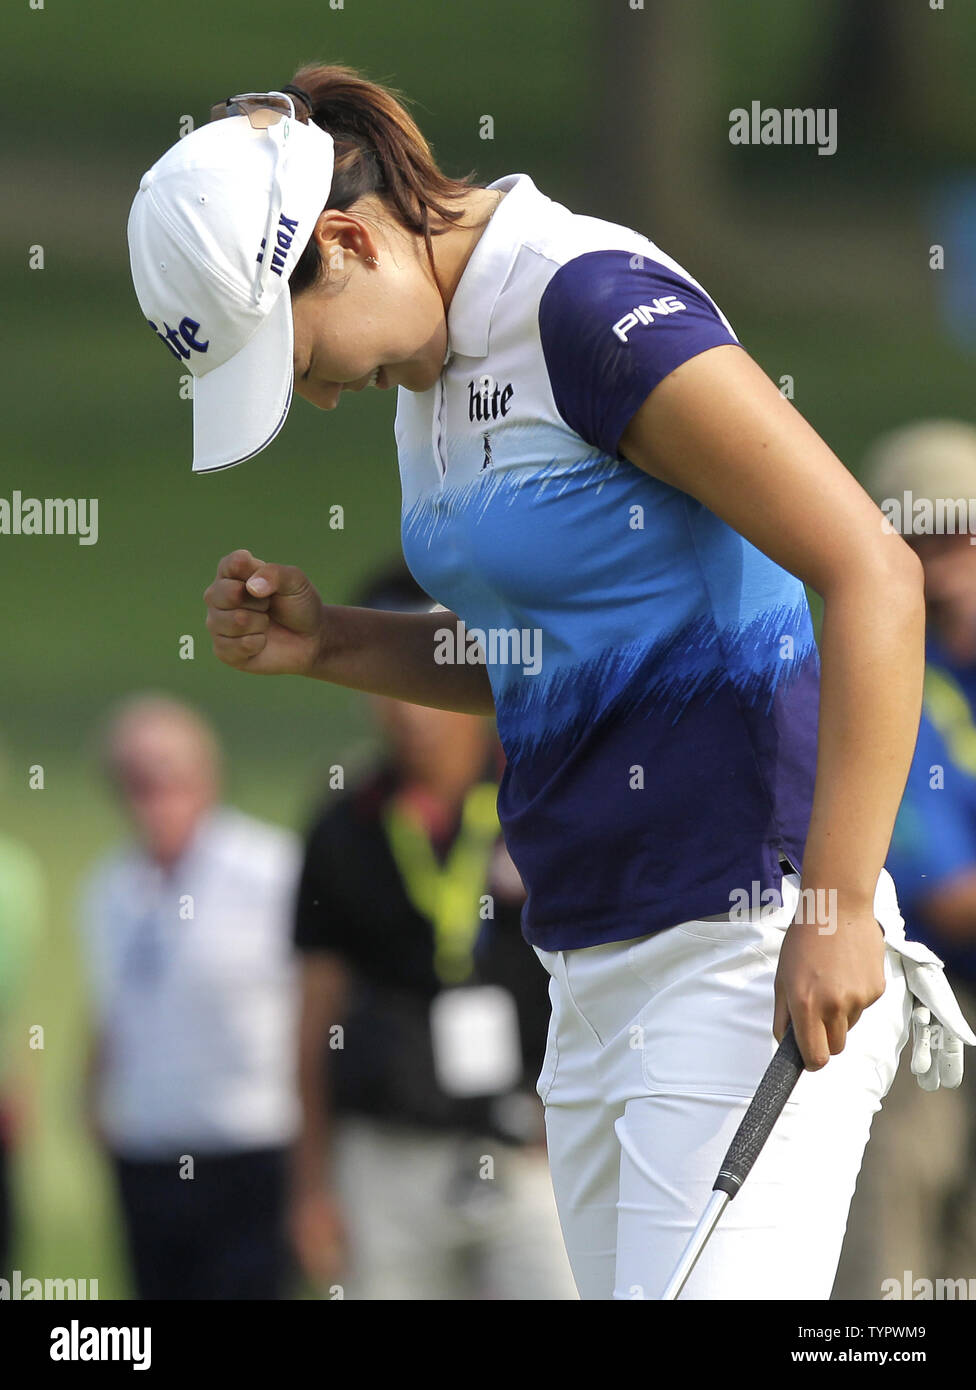 In Gee Chun of Korea celebrates after making a birdie putt on the 16th green in the final round of the LPGA U.S. Women's Open Championship at Lancaster Country Club in Lancaster, PA on July 12, 2015. Chun wins the U.S. Women's Open and her first LPGA major championship with a score of 8 under par.     Photo by John Angelillo/UPI Stock Photo